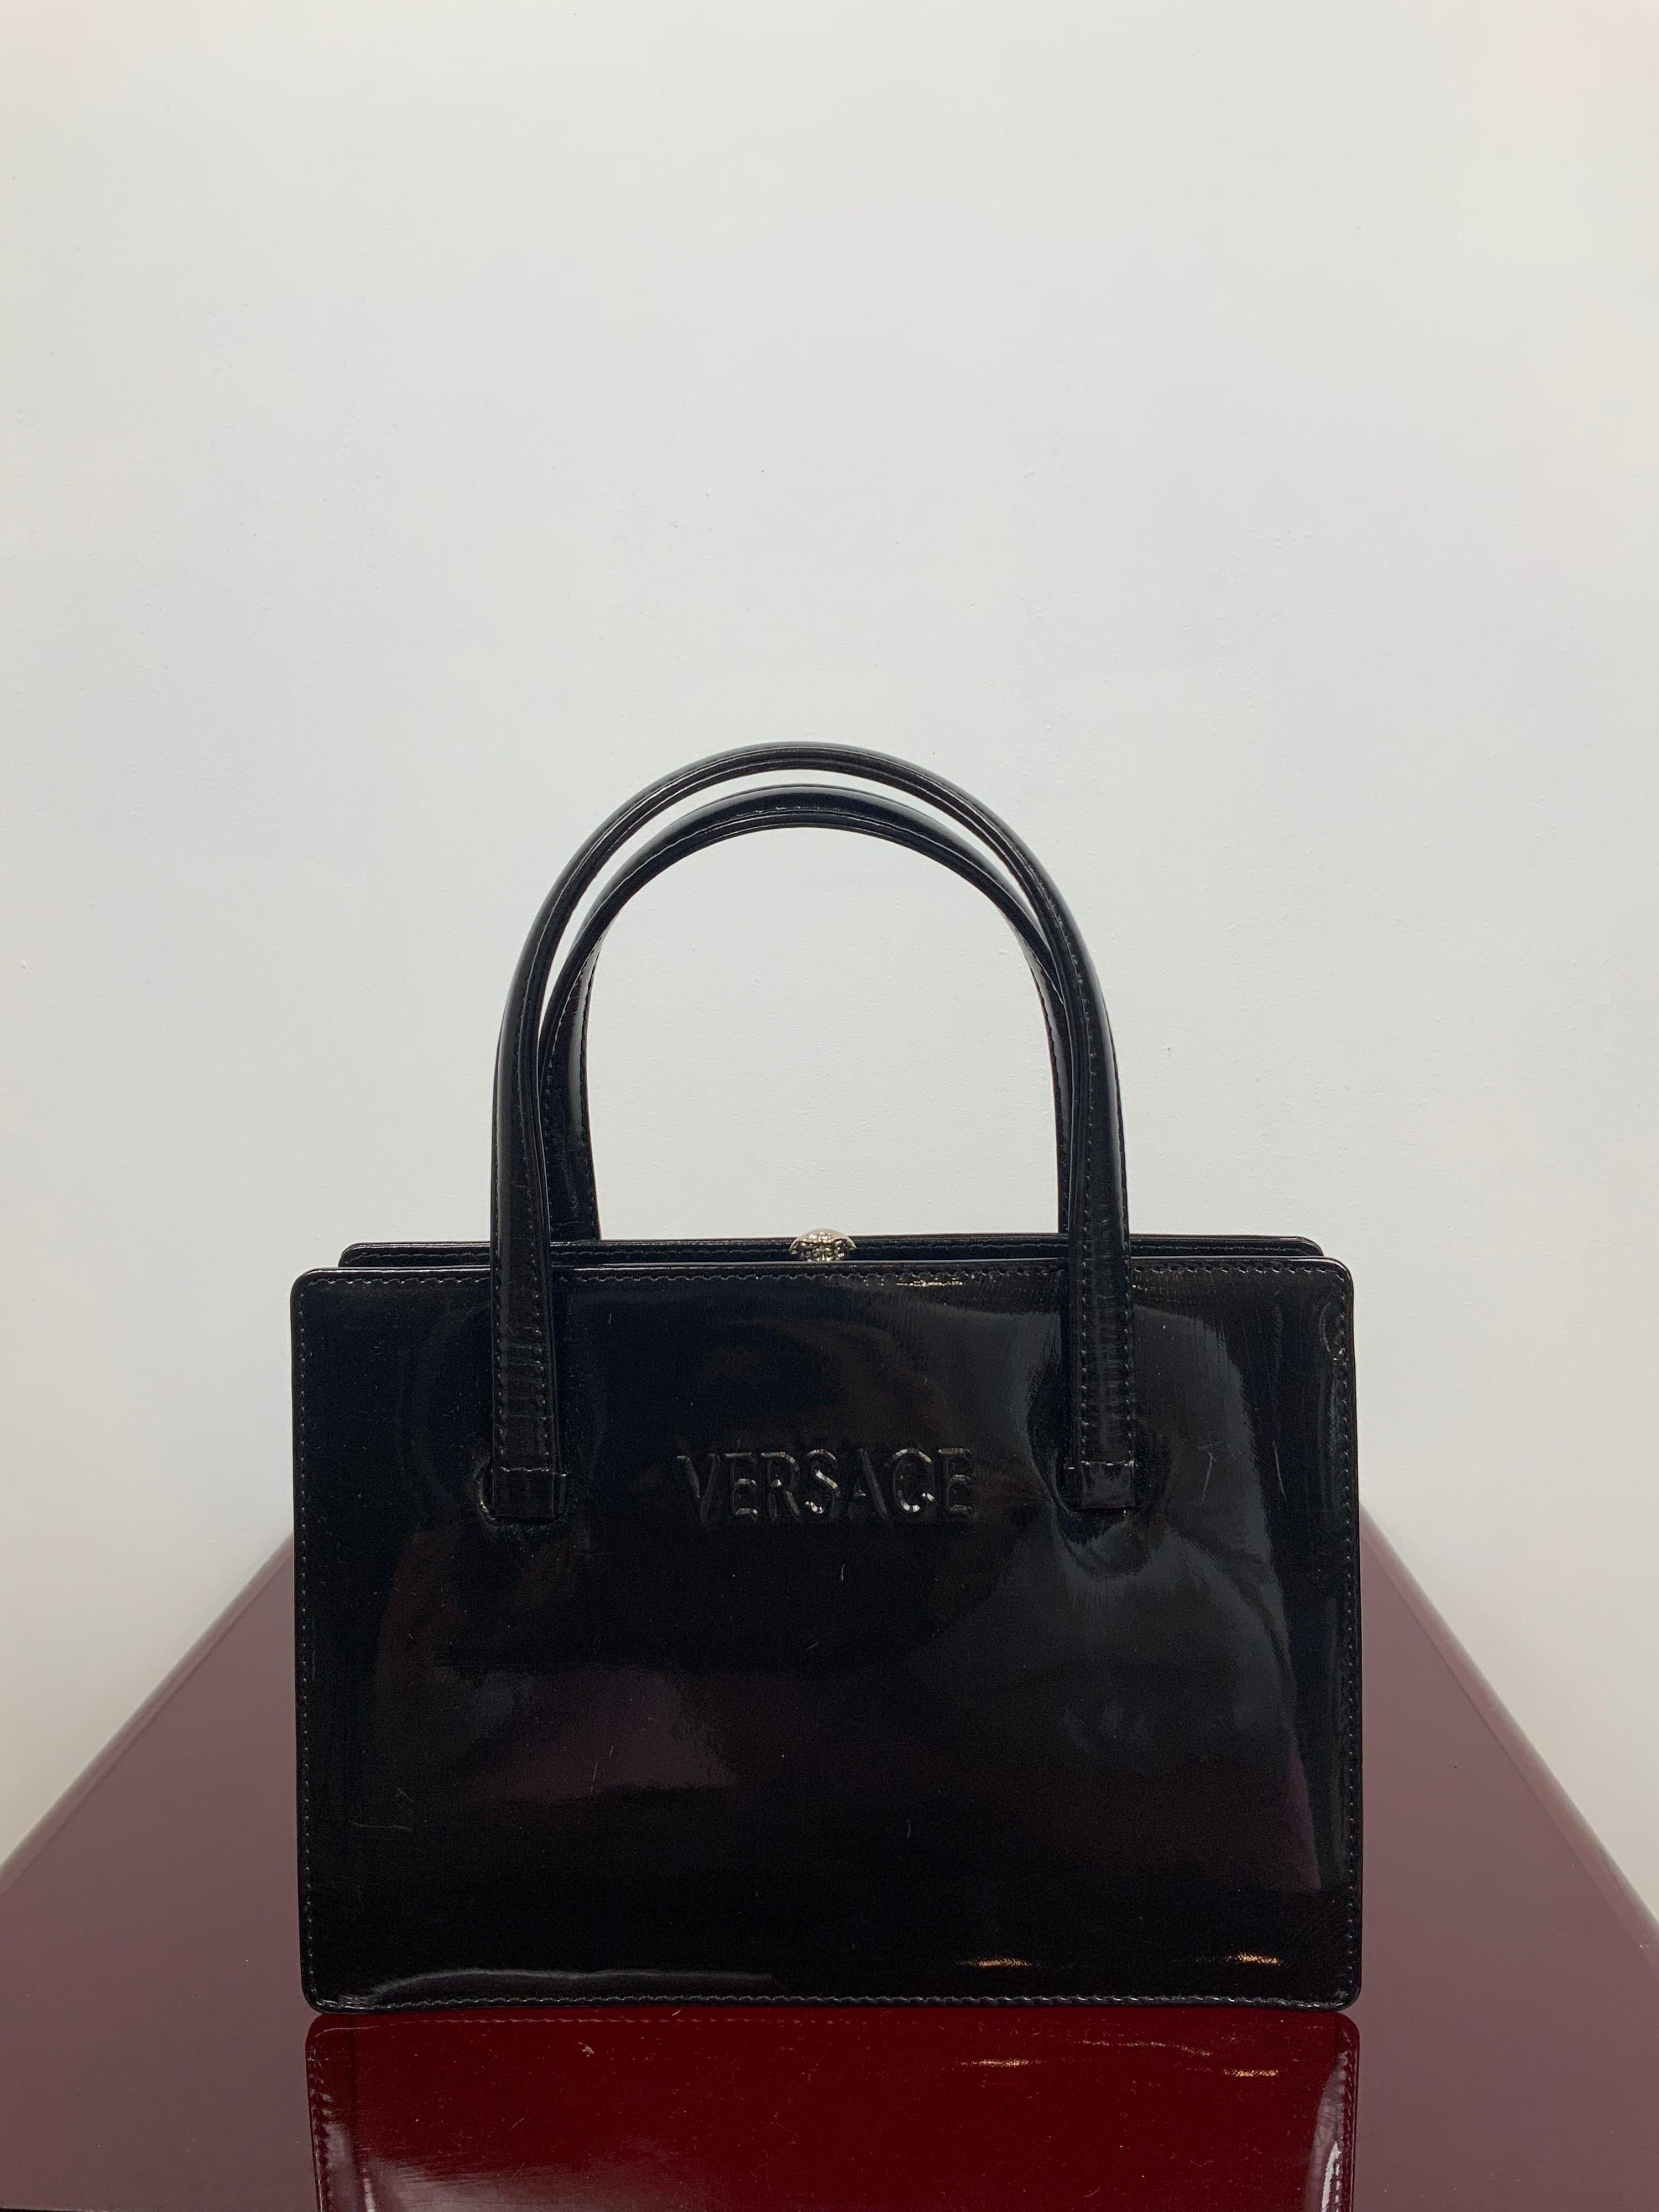 Gianni Versace bag.
Black patent leather bag.
Featuring a clip medusa-shape closure.
Measurements:
height 15 cm
width 22 cm
depth 7 cm
handle 15 cm
It comes with the original dust bag.
Conditions: Very Good - Previously owned and gently worn, with